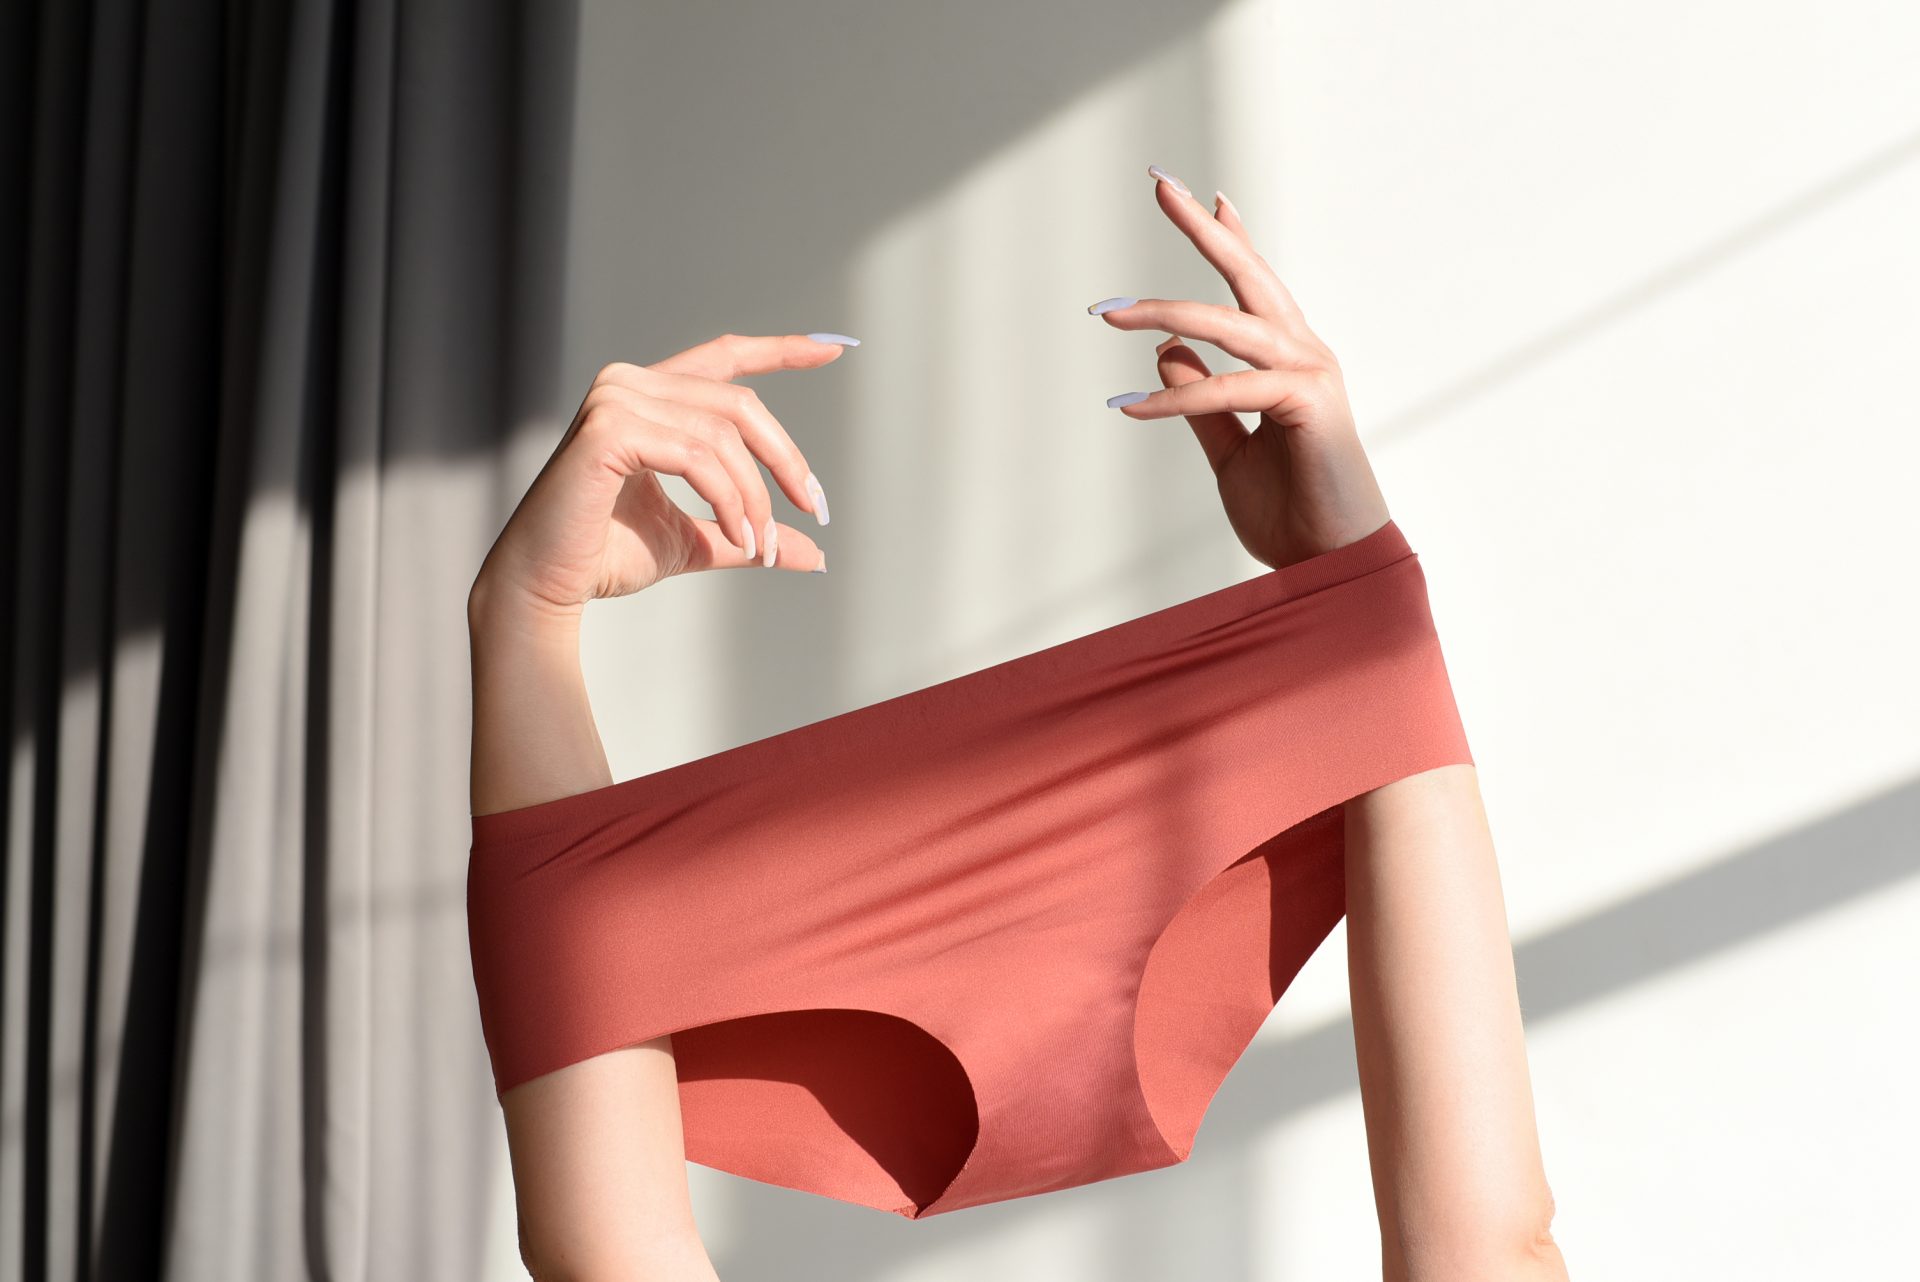 Thinx period pants advert has been deemed too 'inappropriate' too